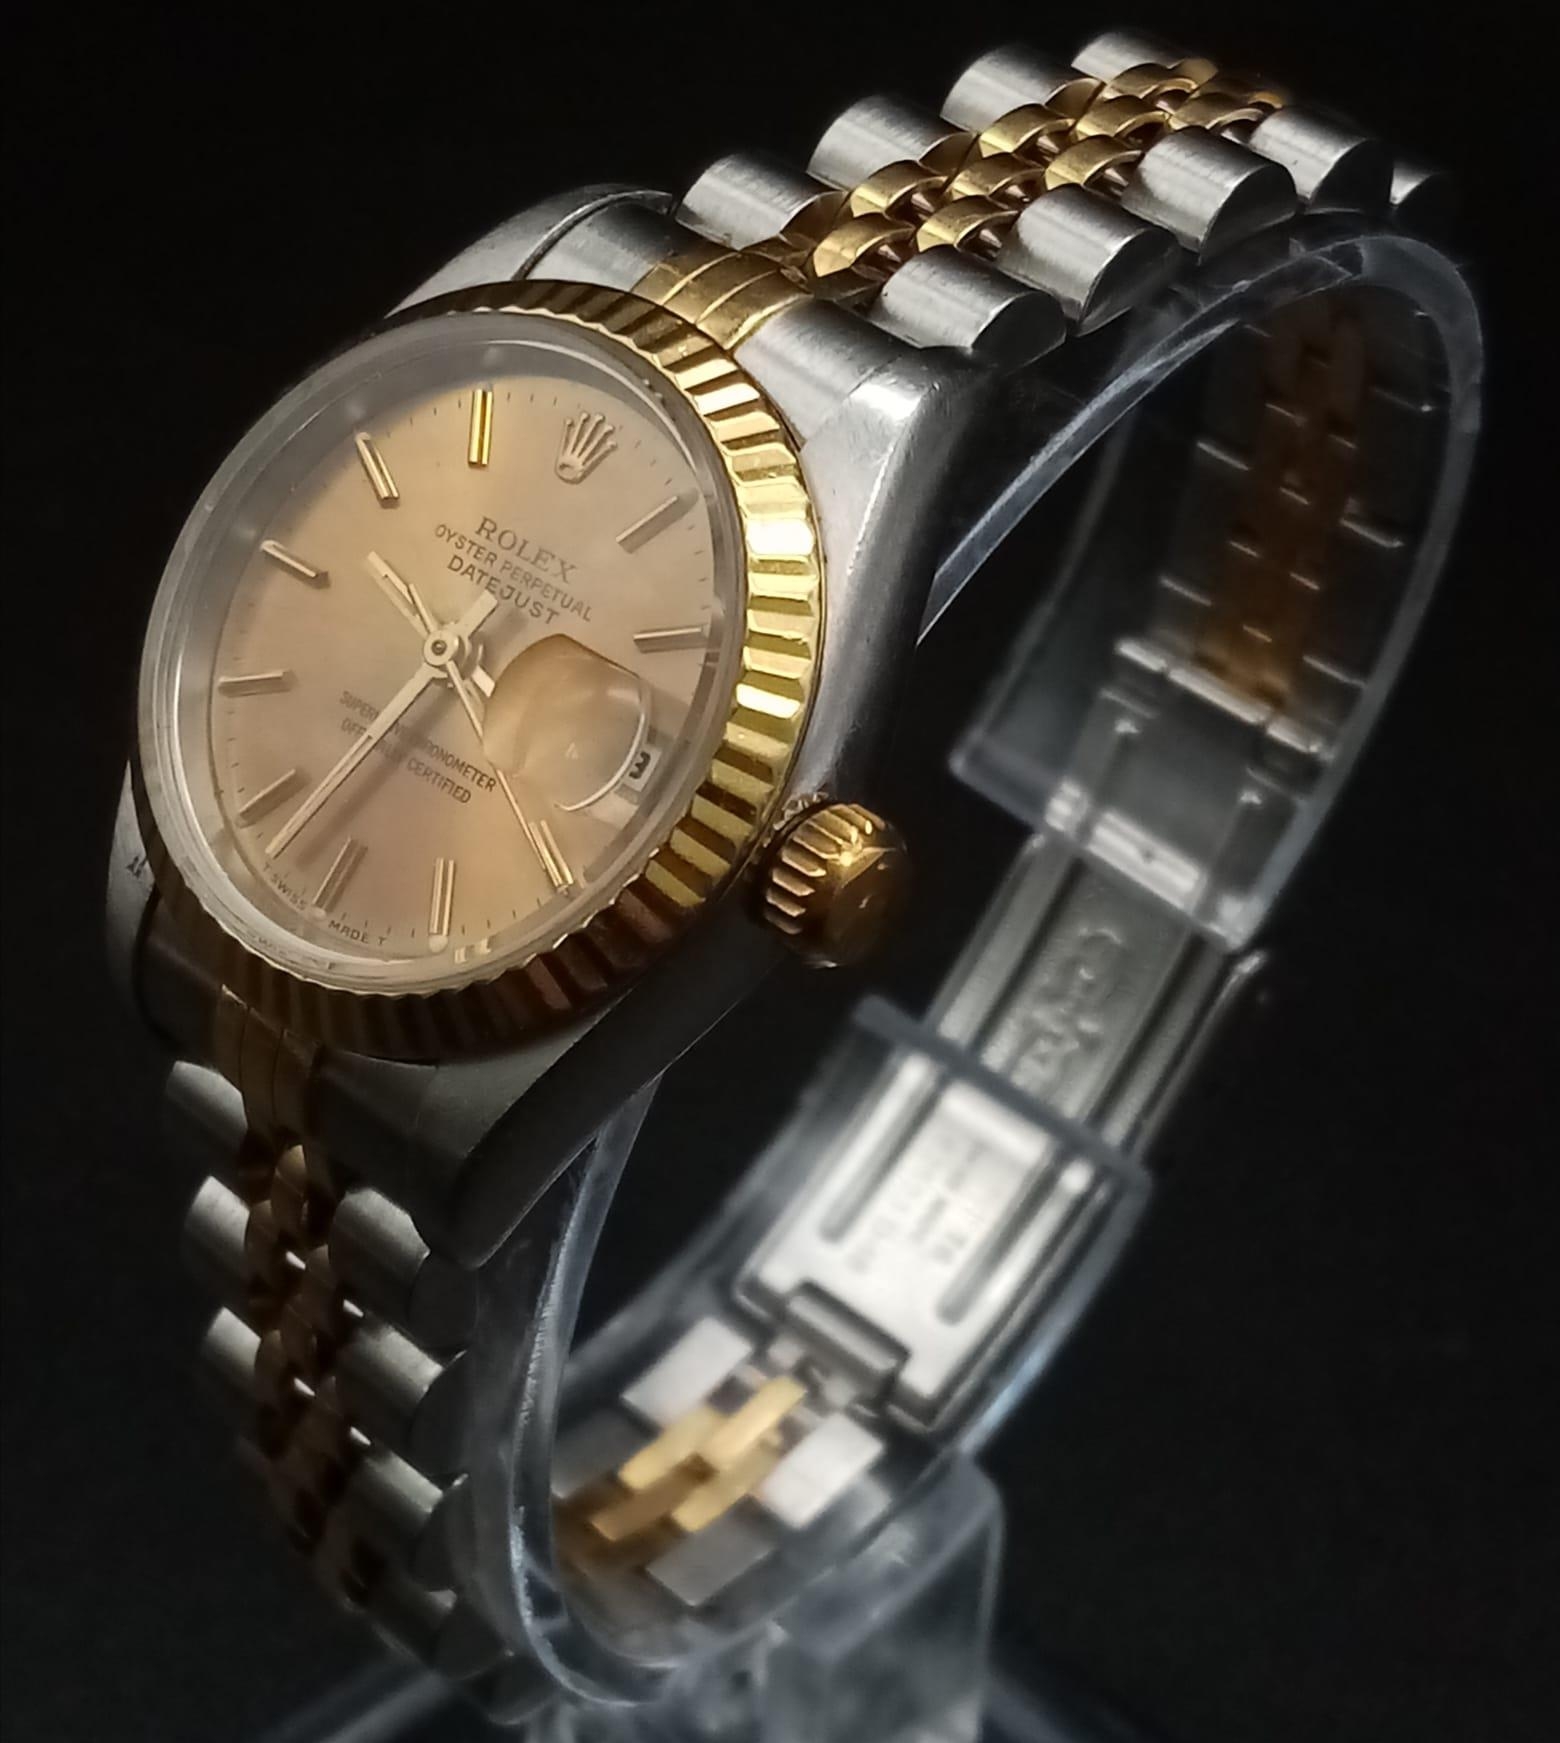 A Rolex Oyster Perpetual Datejust Ladies Watch. Bi-metal strap and case - 26mm. Gold tone dial - Image 3 of 13